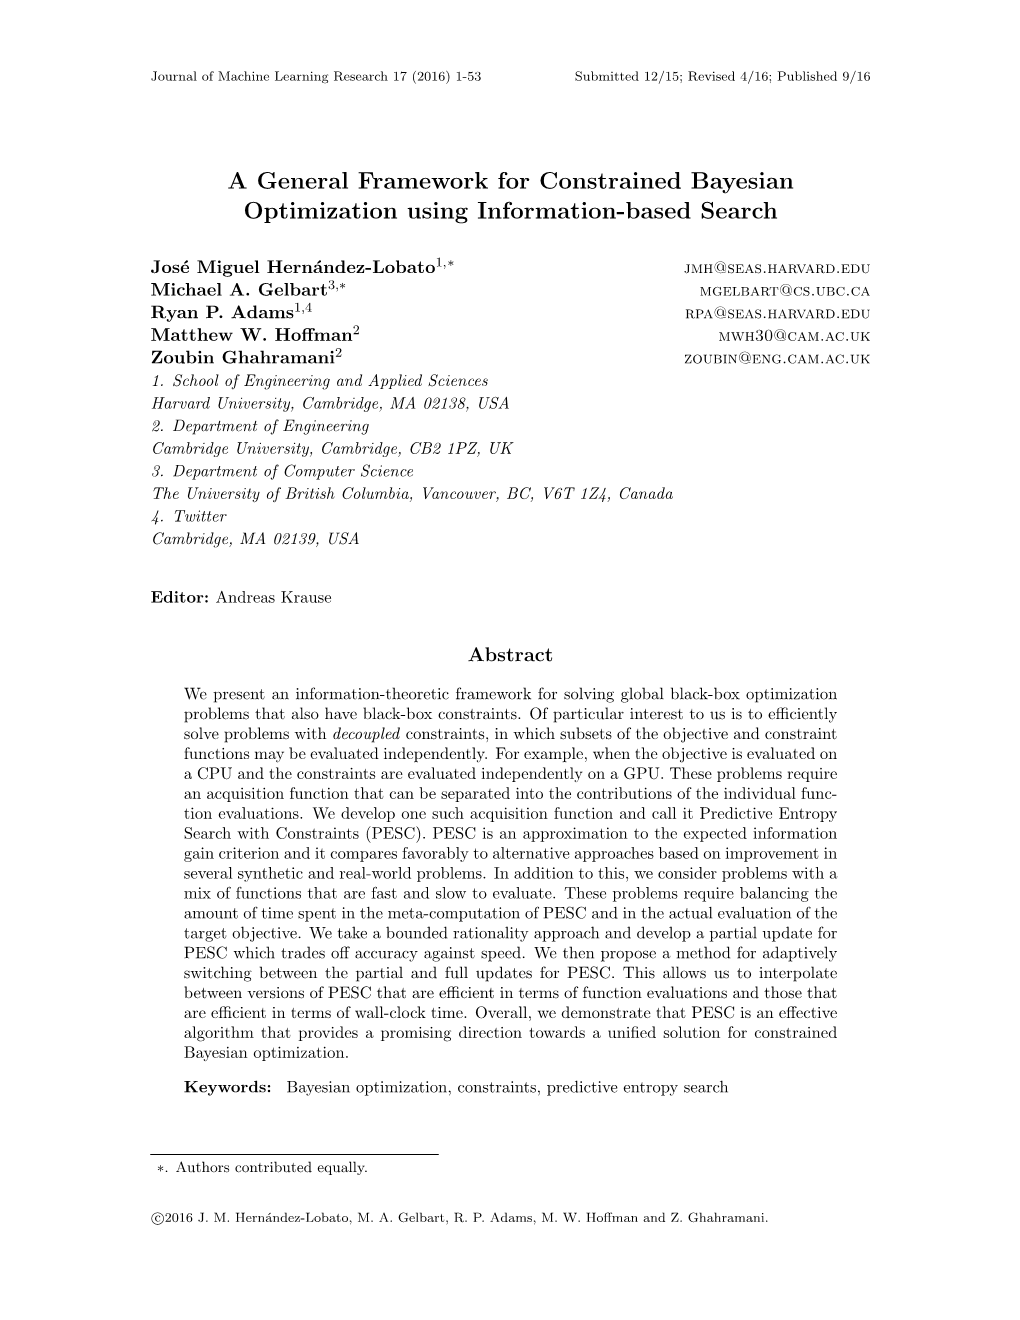 A General Framework for Constrained Bayesian Optimization Using Information-Based Search